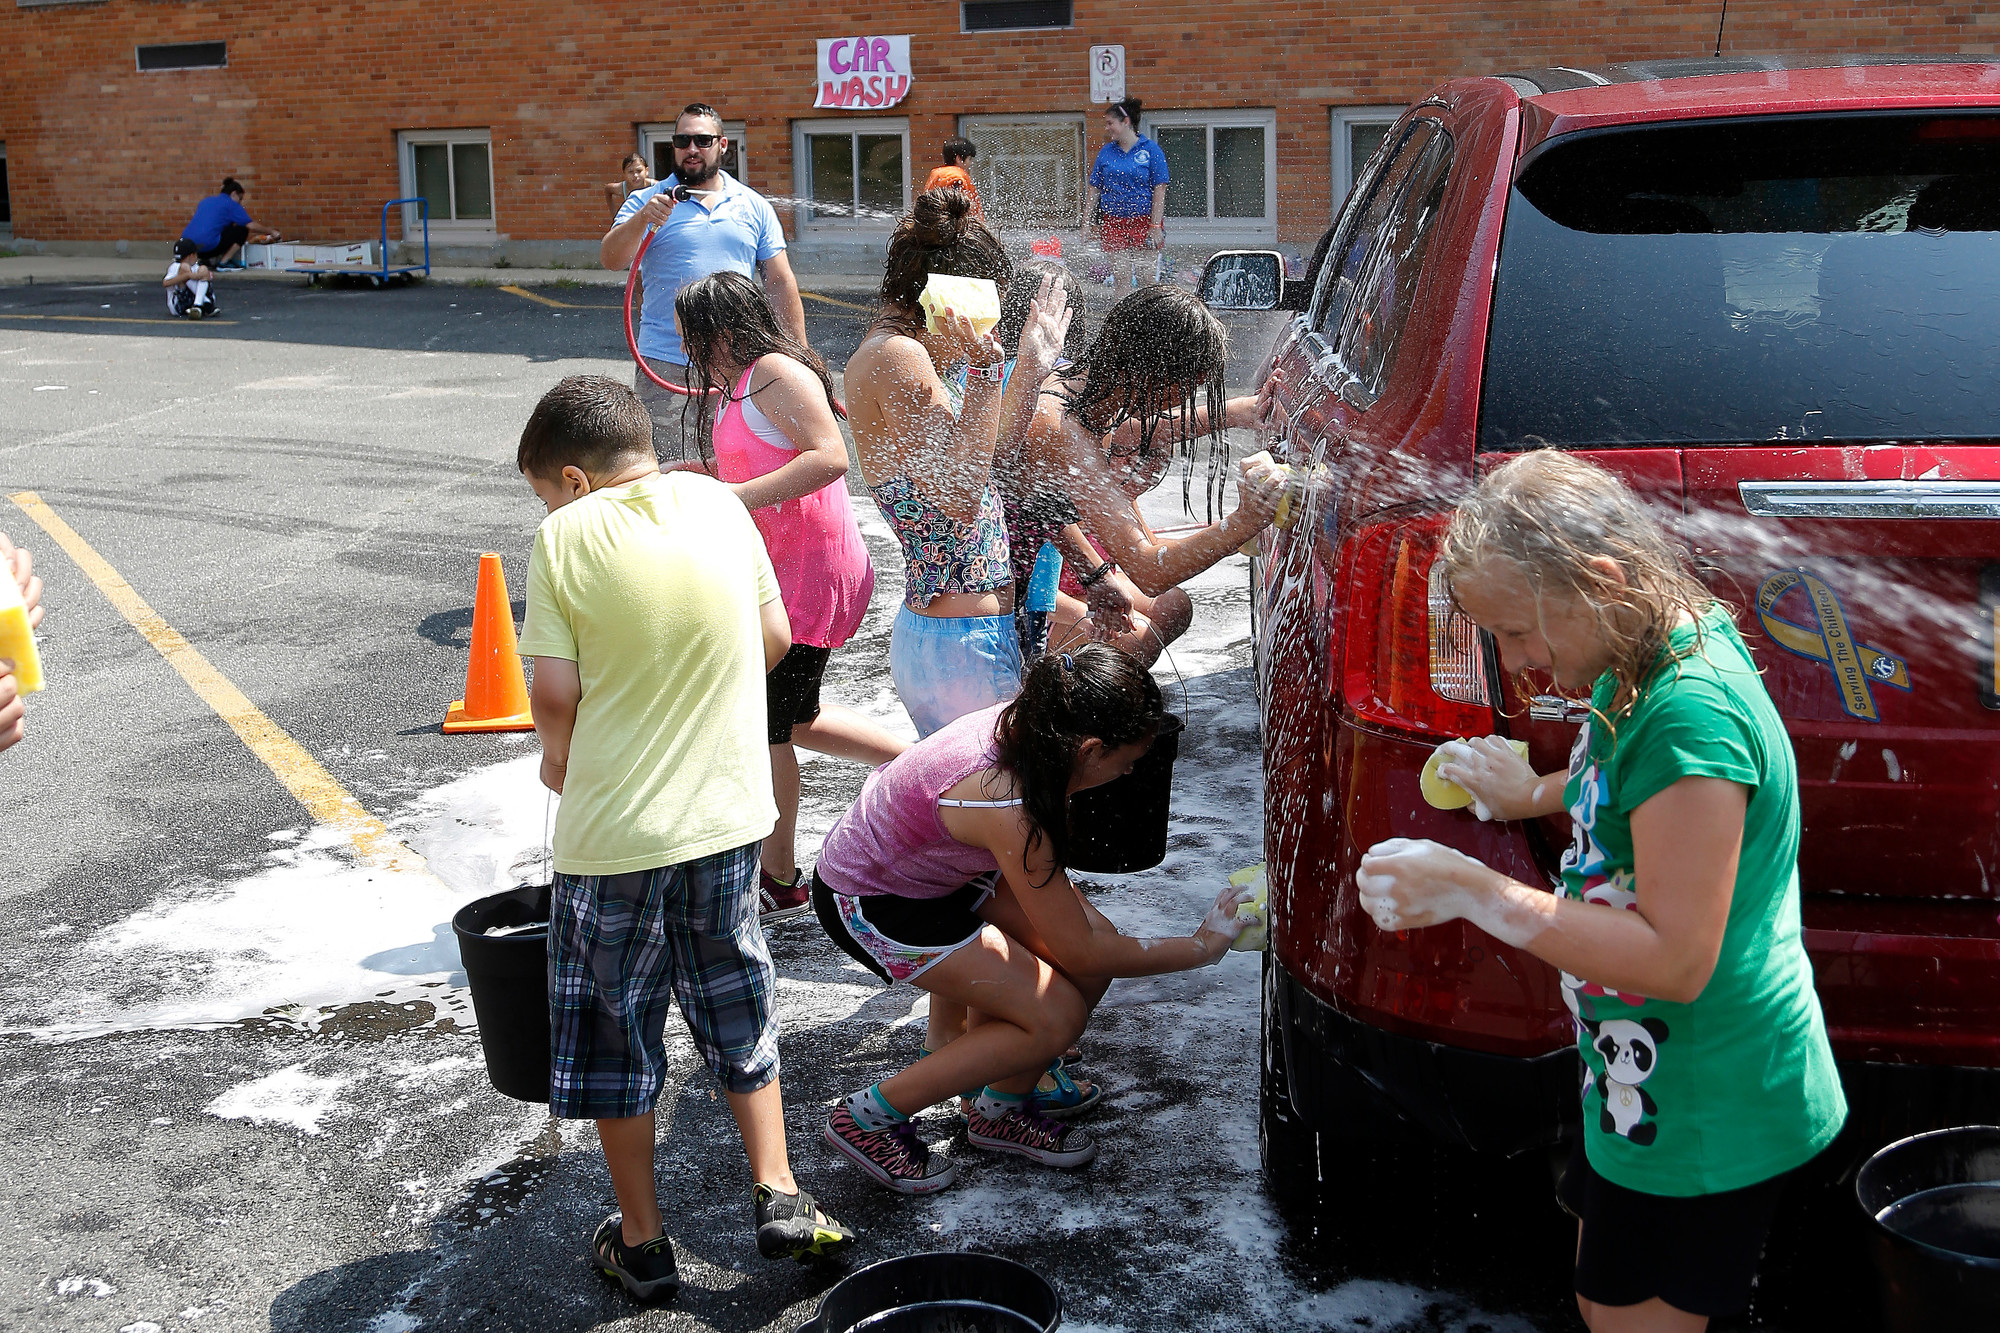 Volunteers from the Extended Playground Camp, along with the car they are washing, entered the rinse cycle.